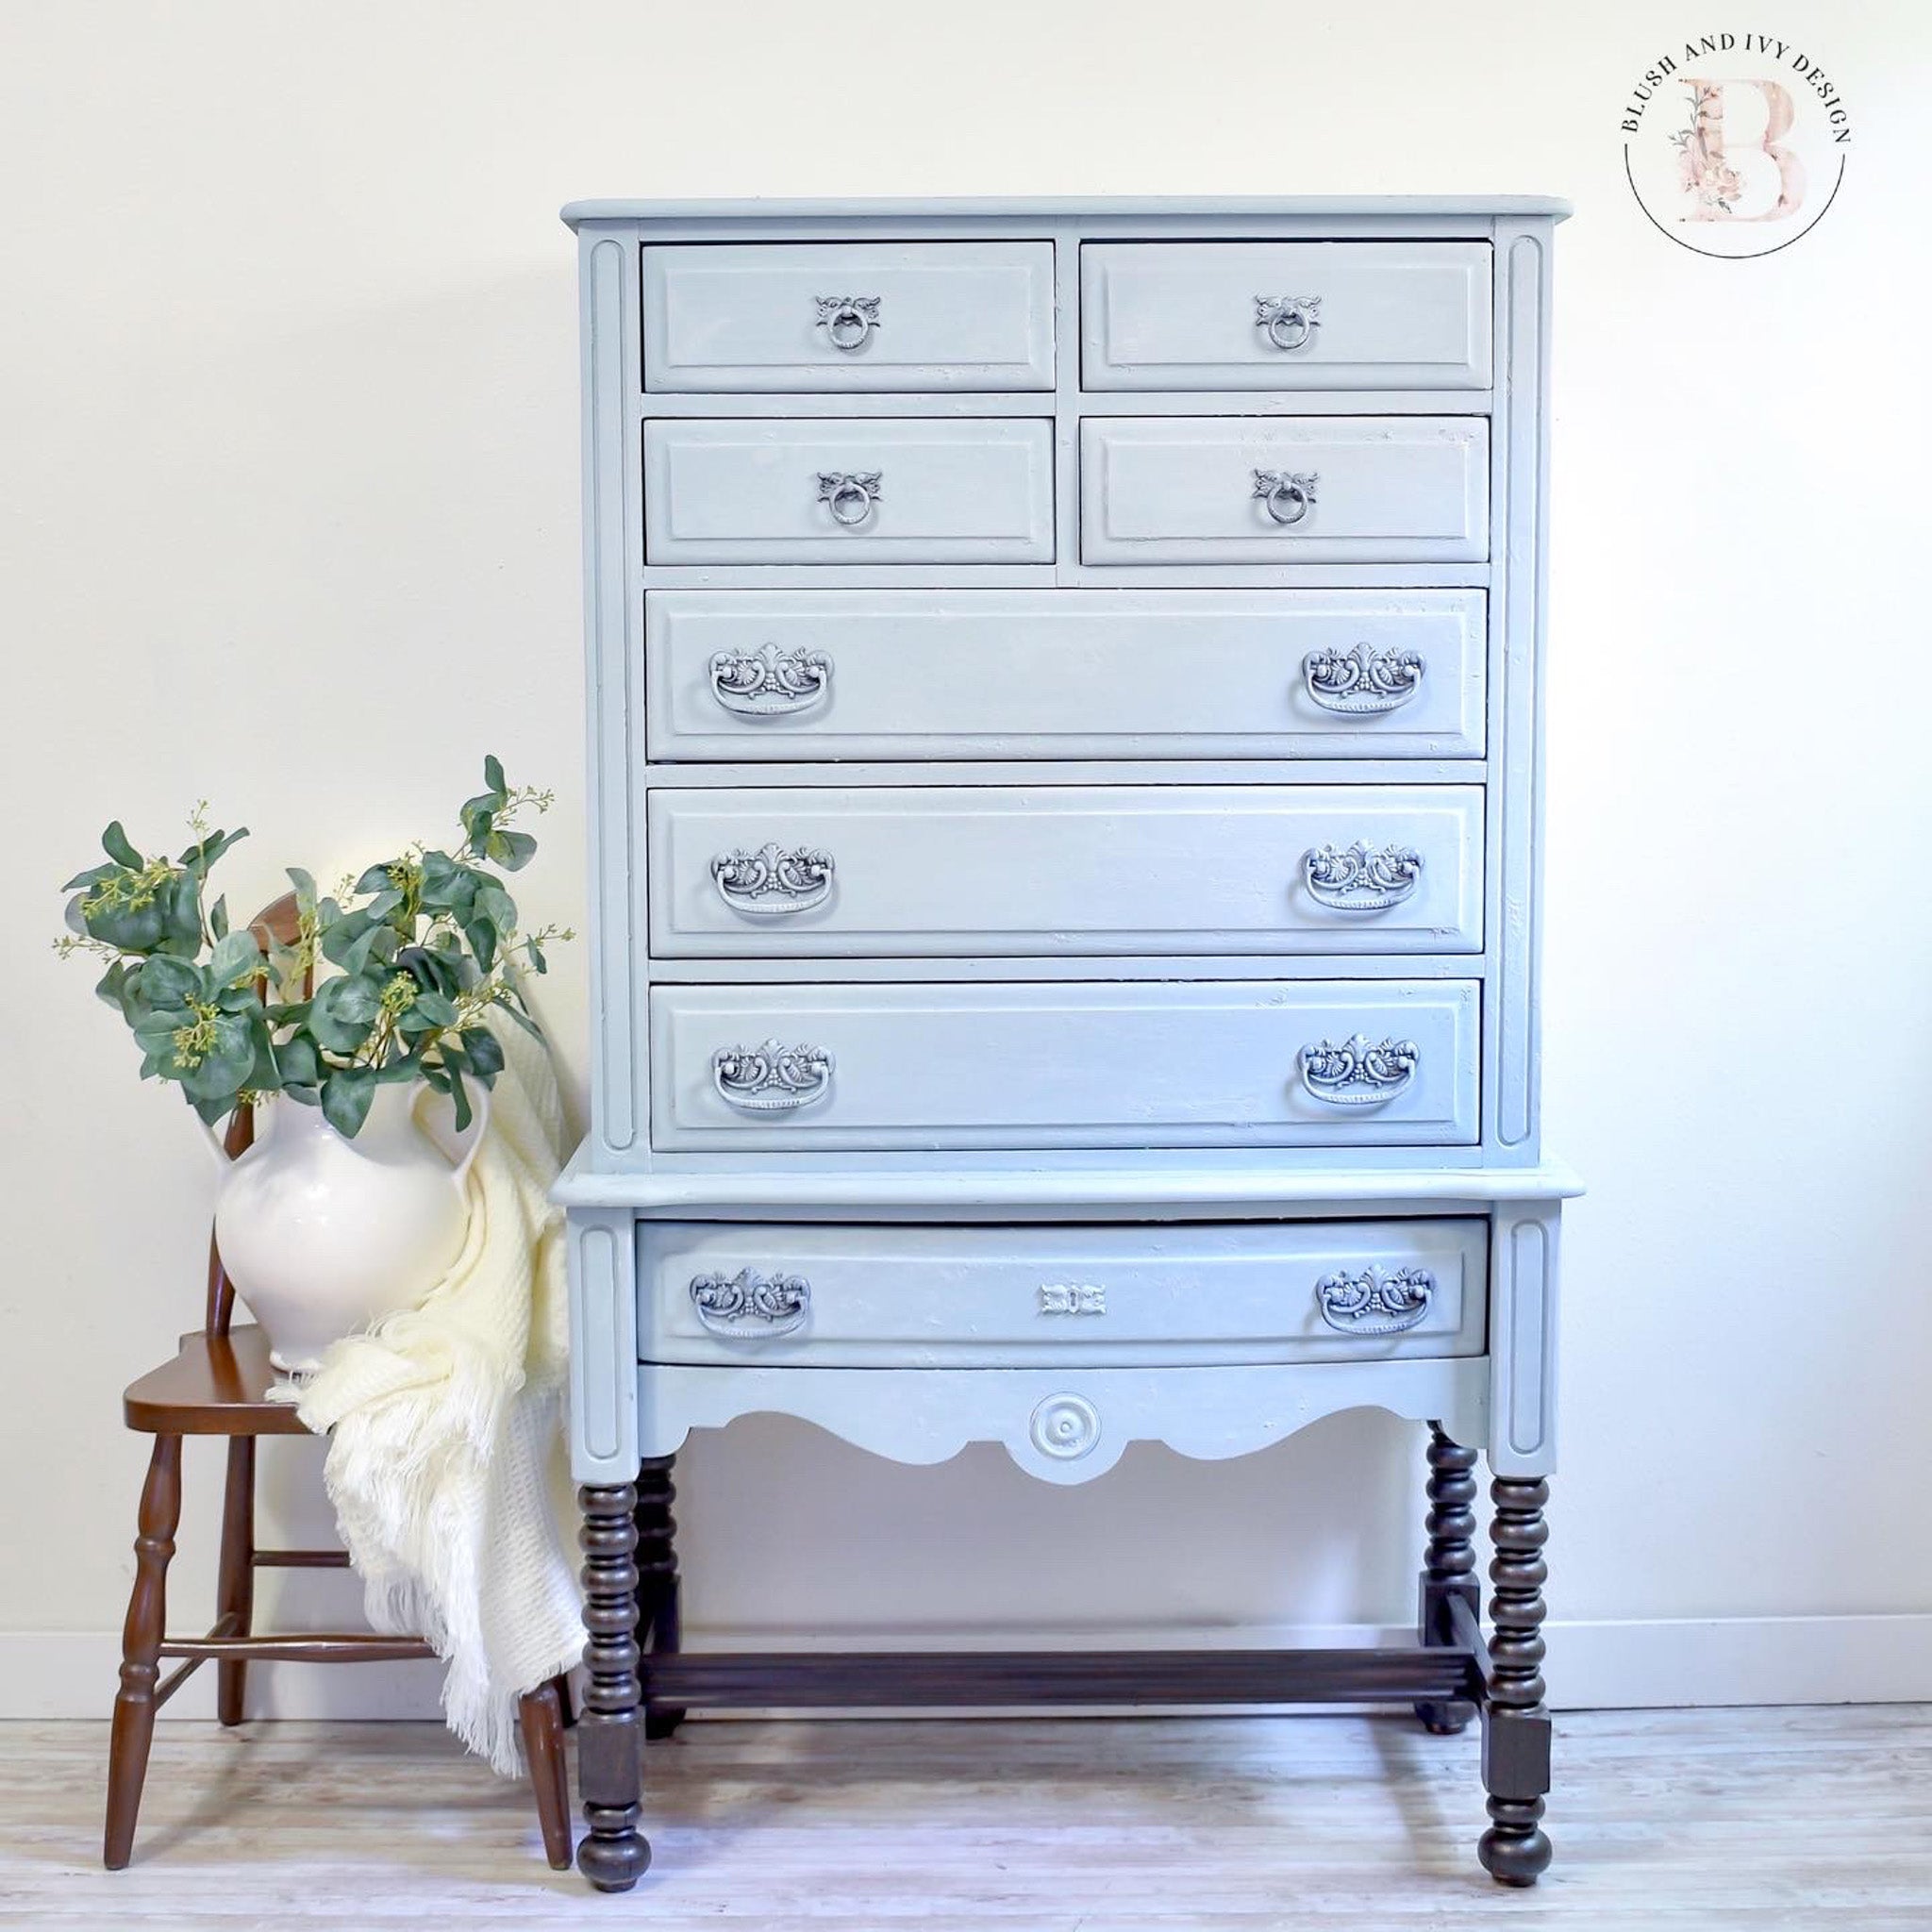 A vintage lingerie chest refurbished by Blush and Ivy Design is painted in Dixie Belle's Savannah Mist chalk mineral paint.